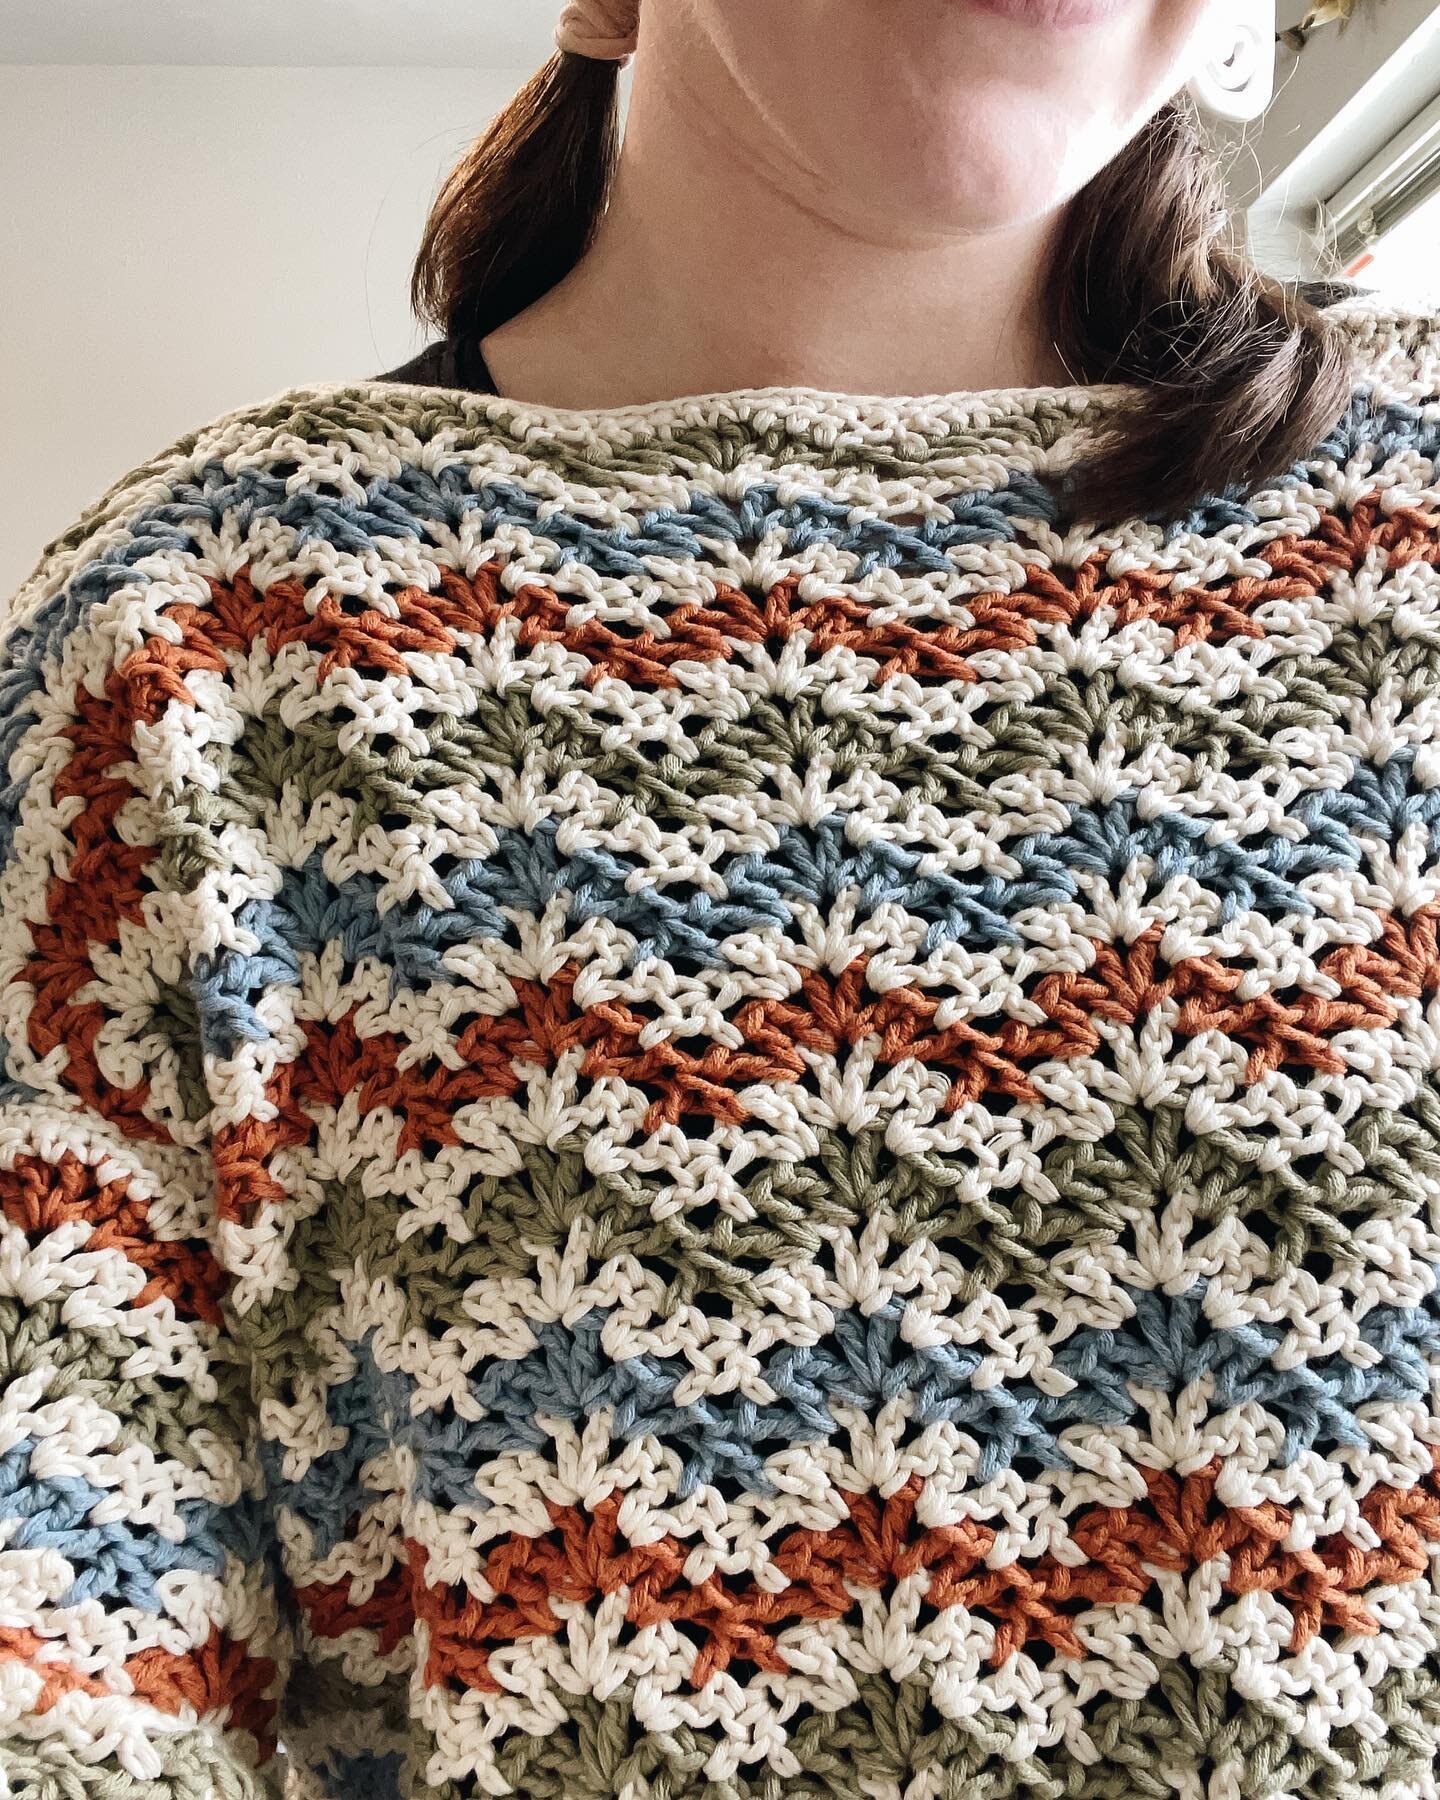 ✨Surprise ✨
Turns out my testers are SO amazing that editing the final Margot sweater pattern was a breeze and I decided to release it today instead of tomorrow!!
Follow the link in my bio to grab the pattern 50% off until Wednesday 🥰
Erin @wolf.int